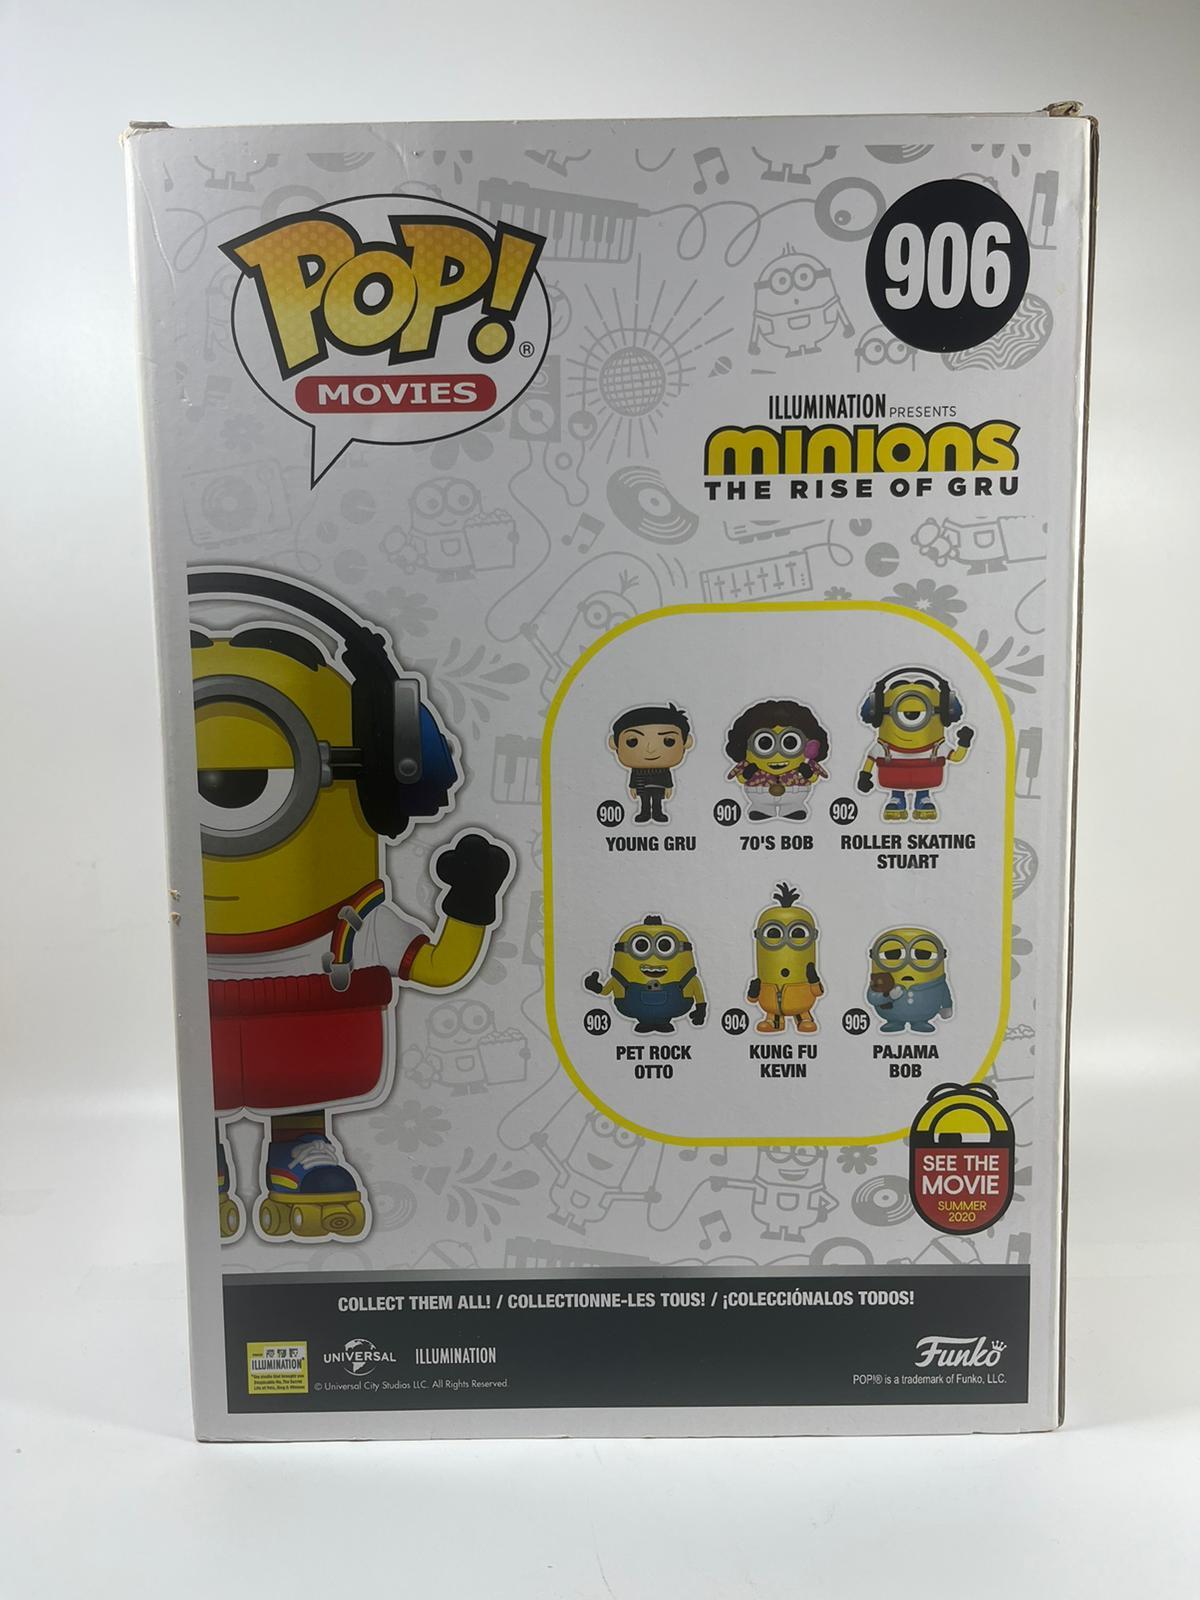 A LARGE FUNKO POP MOVIES 10" 906 MINIONS THE RISE OF GRU ROLLER SKATING STUART VINYL BOXED FIGURE - Image 3 of 5